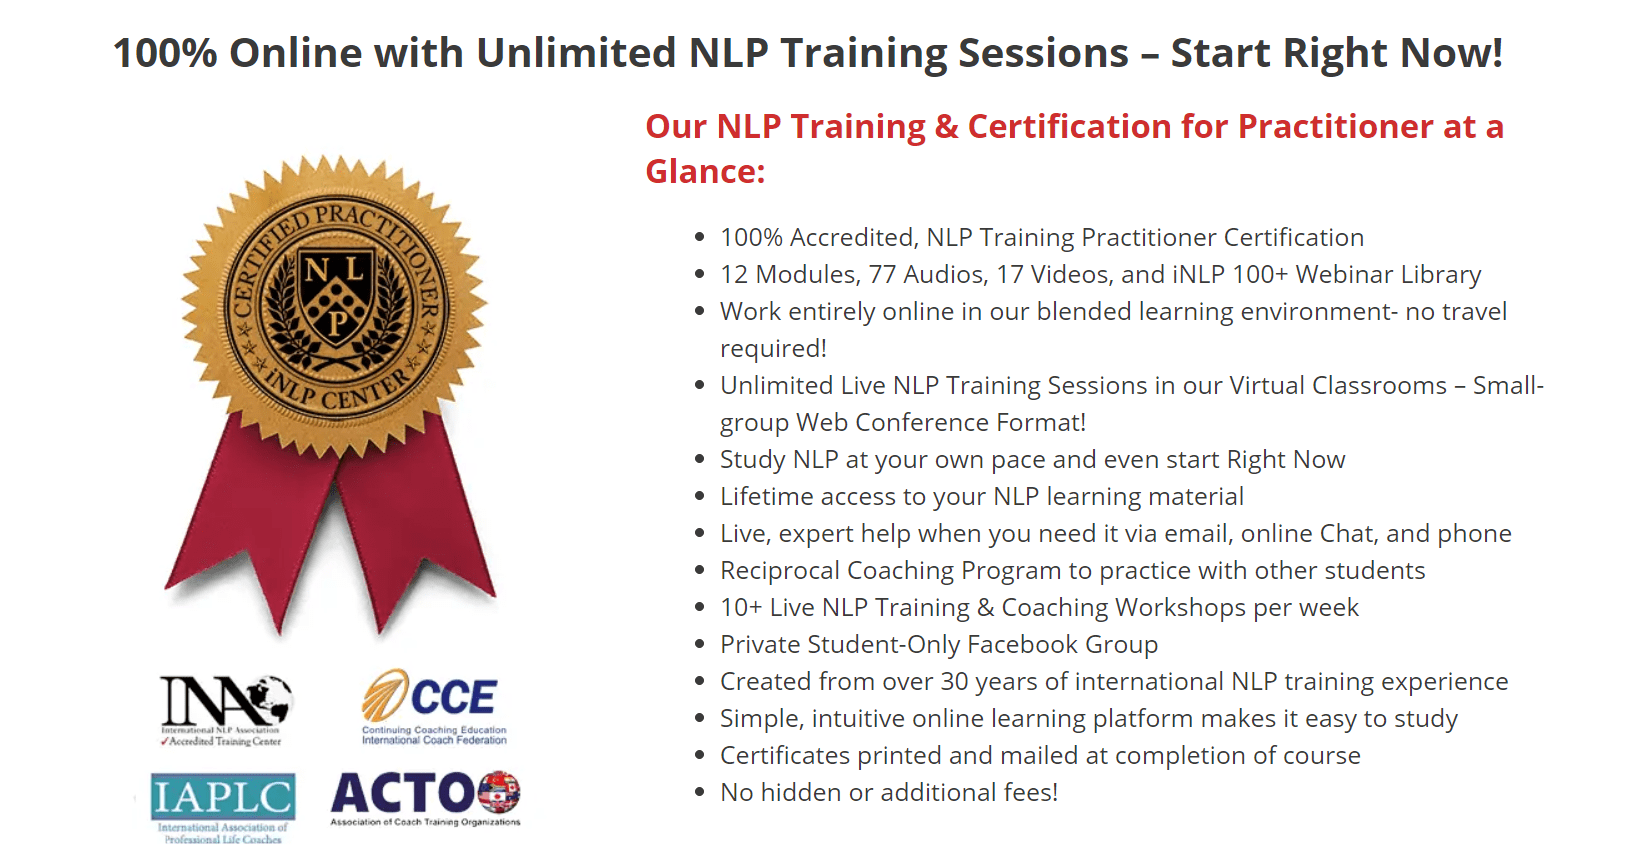 NLP Training & Certification for Practitioner 